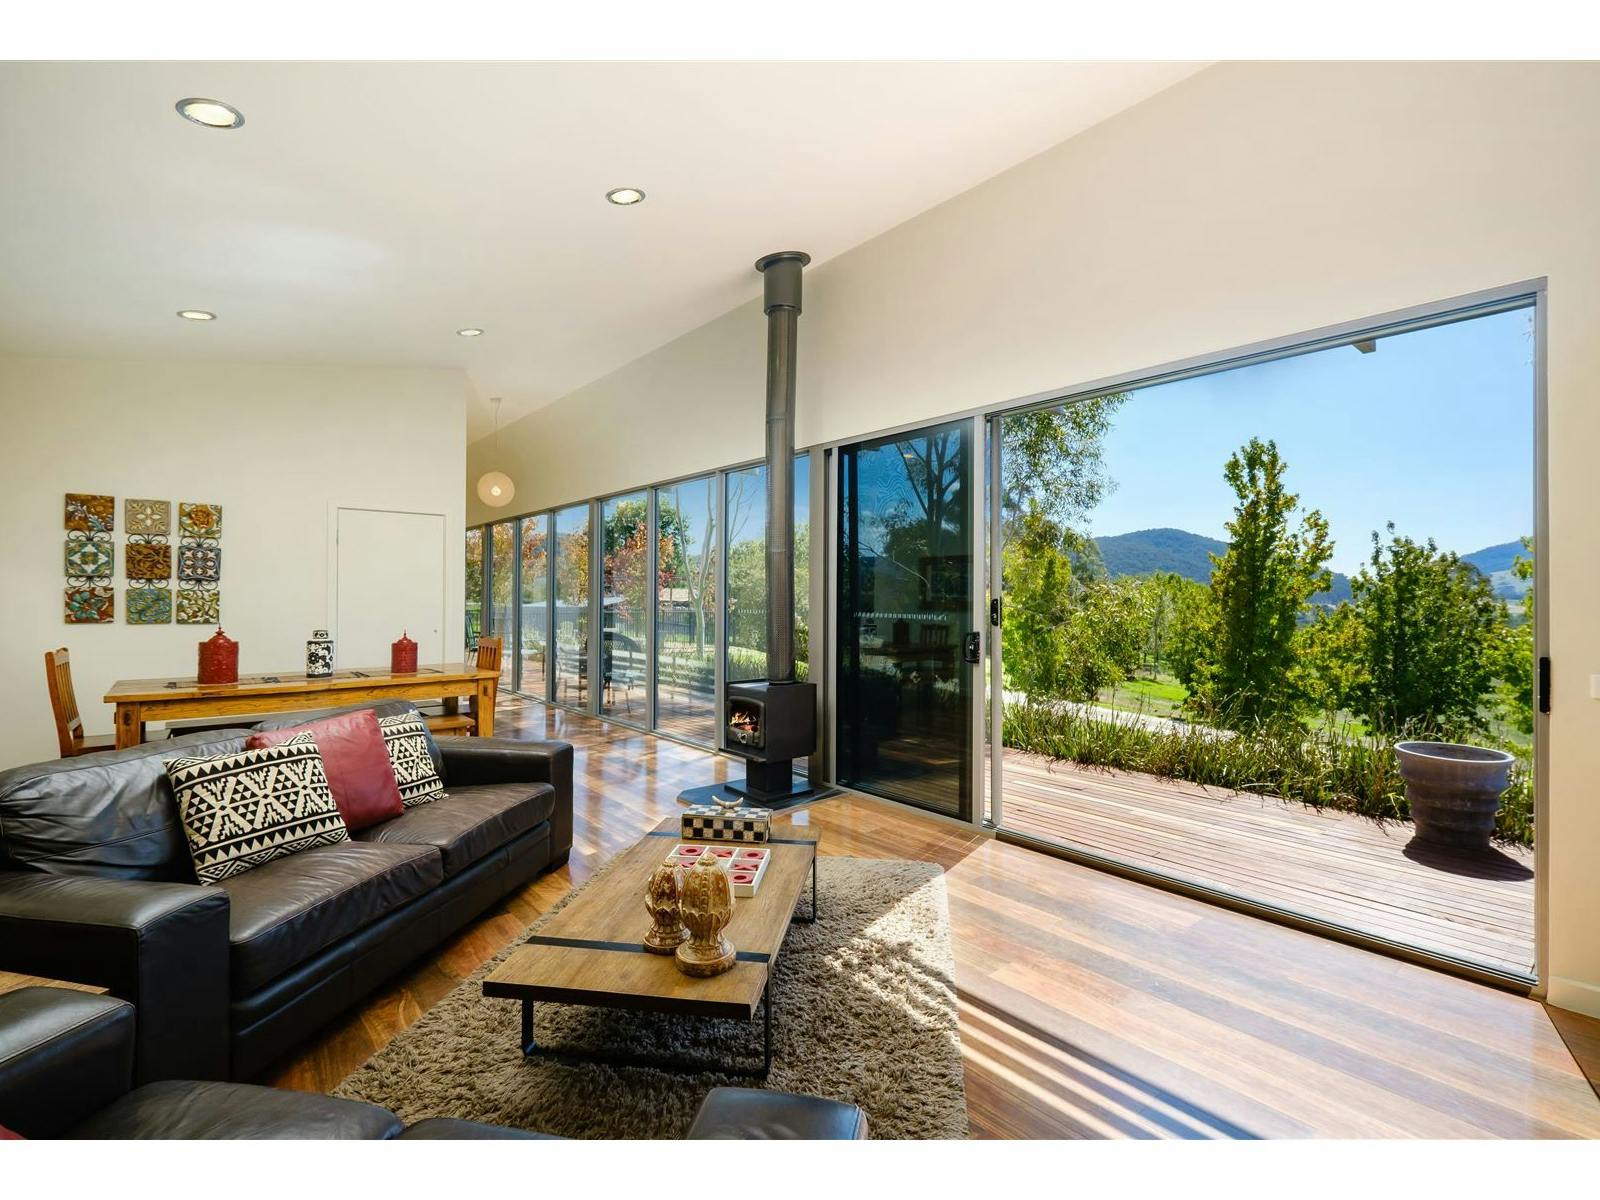 Double-glazed windows fill the Retreat with light and a provide a stunning outlook over the valley